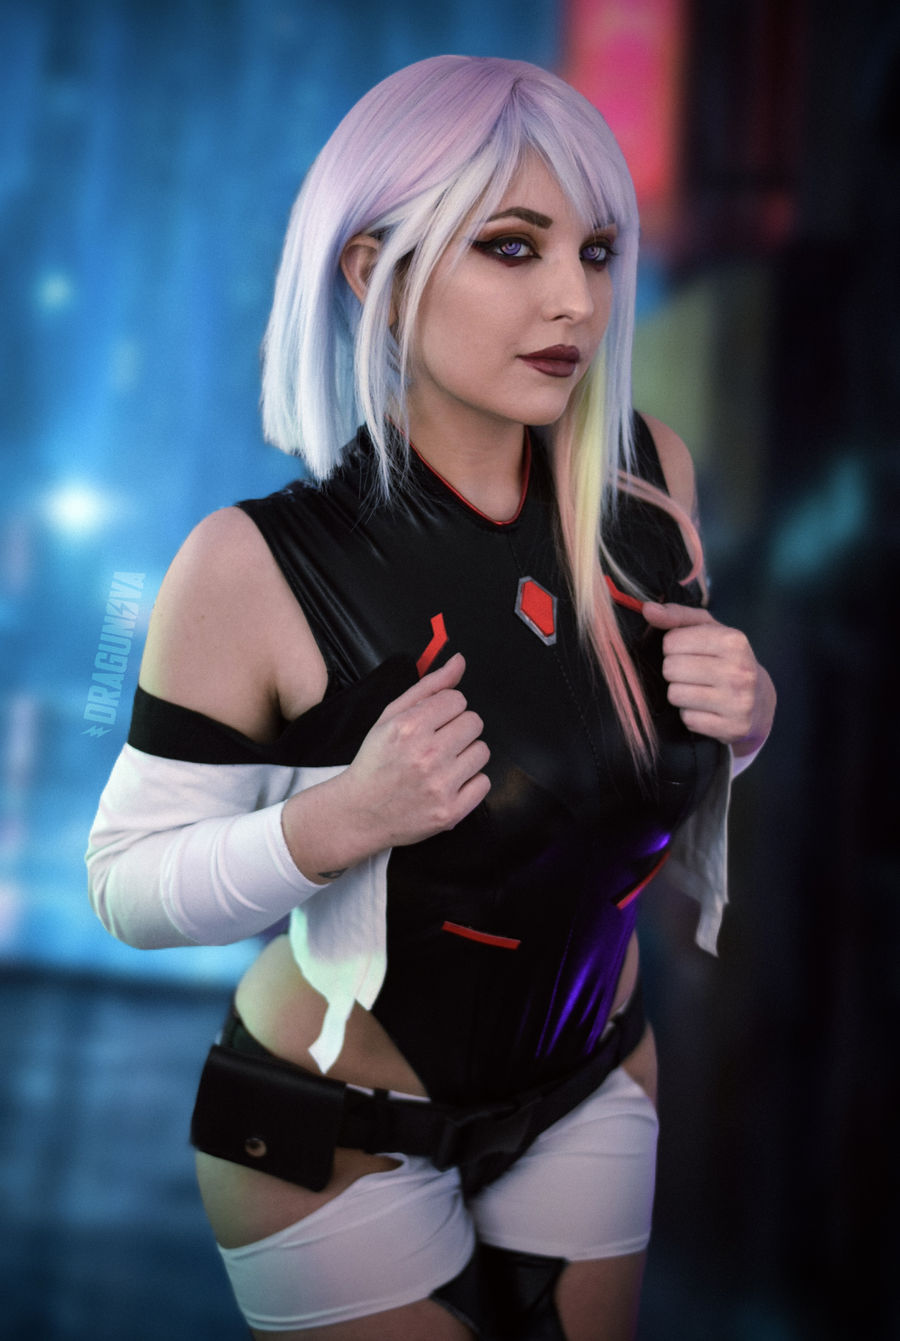 Lucy from Cyberpunk: Edgerunners is brought to life in amazing cosplay